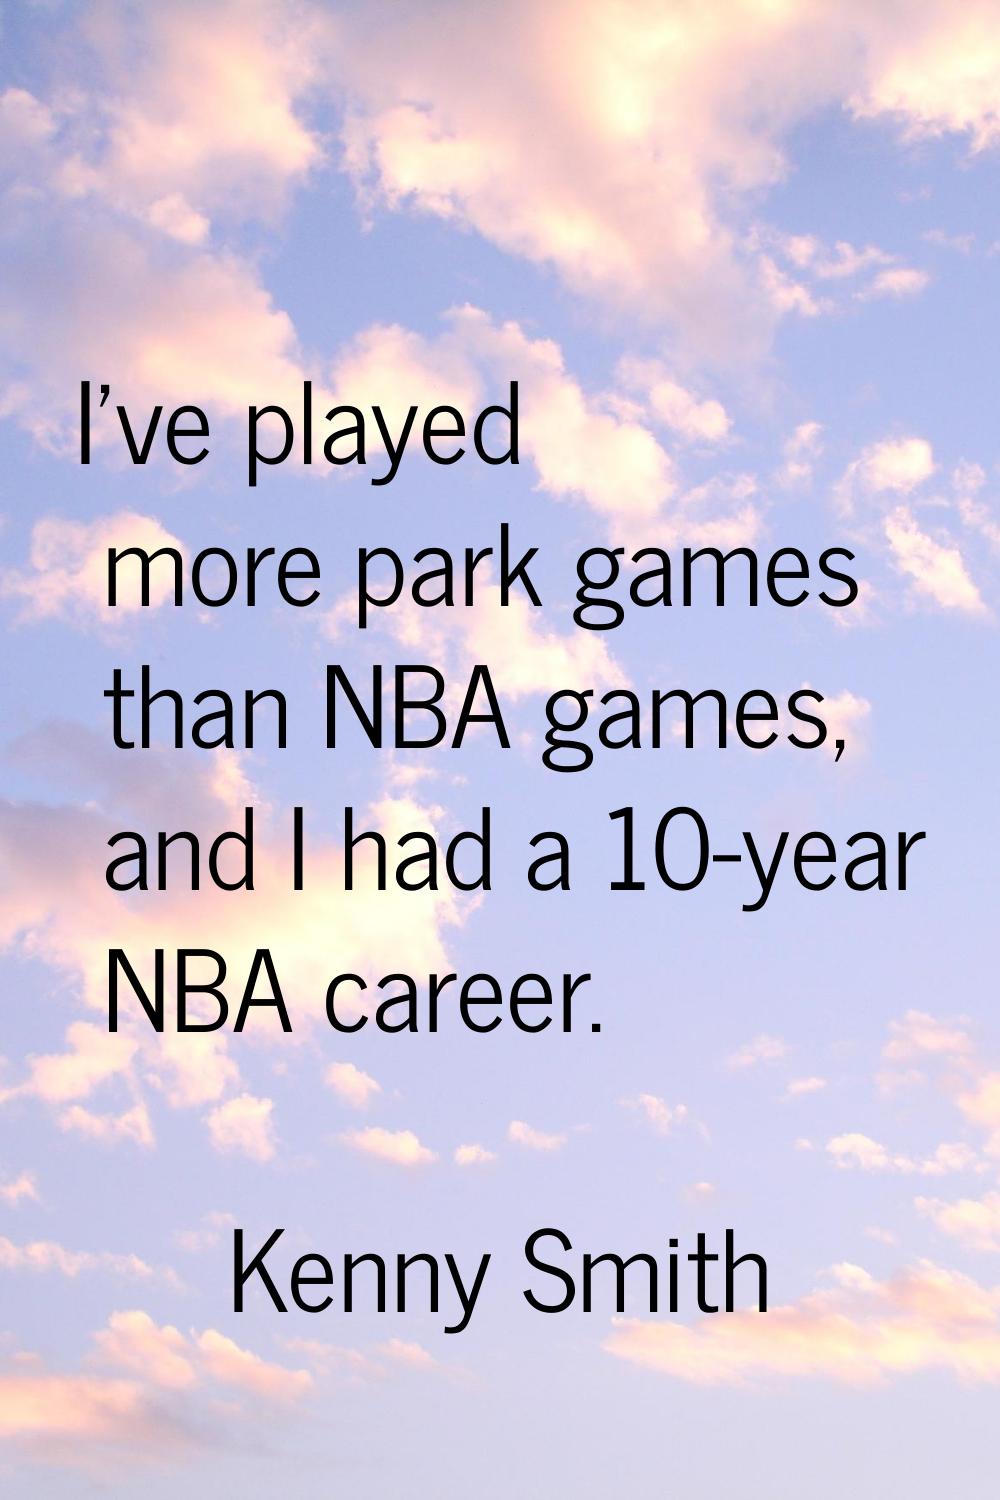 I've played more park games than NBA games, and I had a 10-year NBA career.